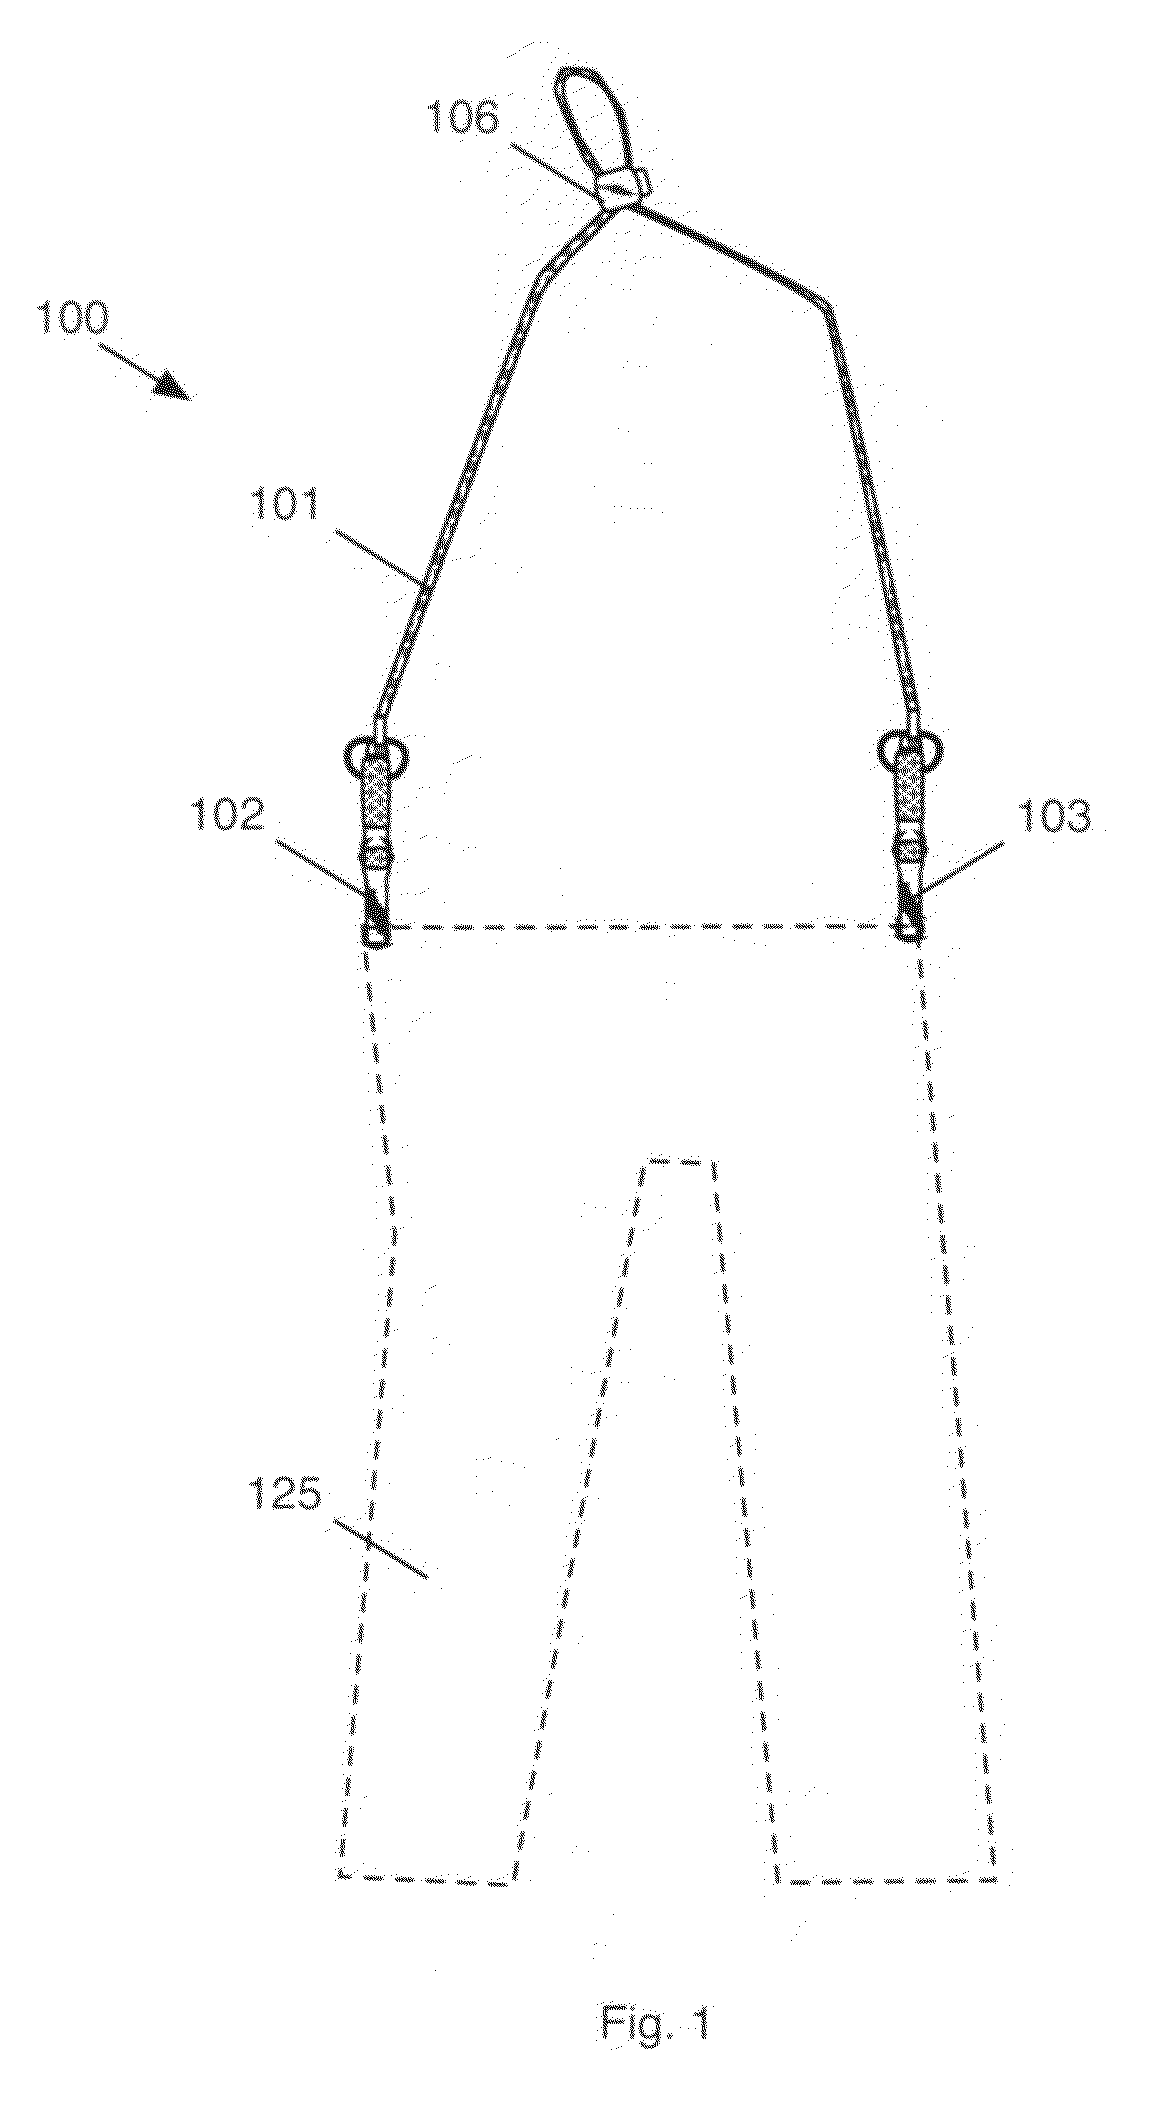 Apparatus for assisting a person to dress